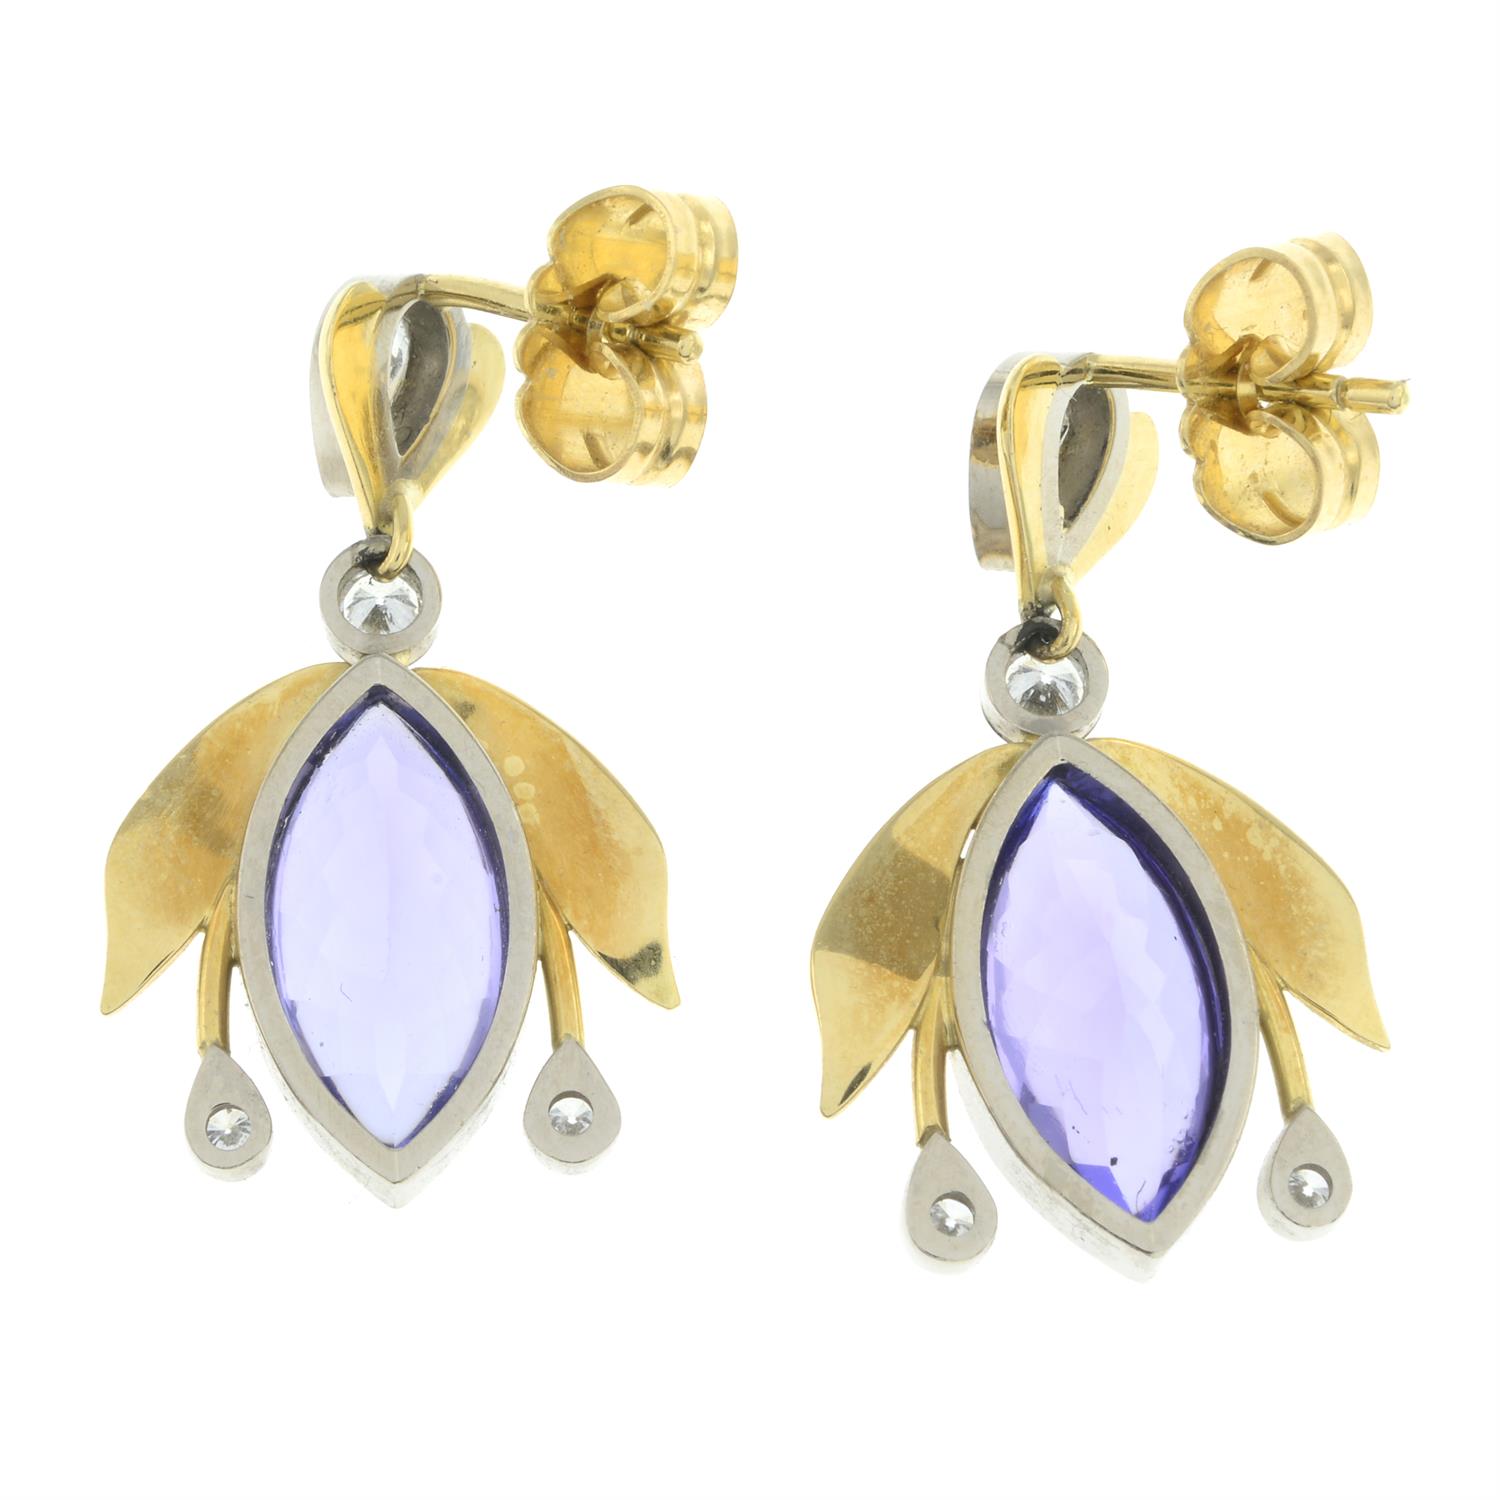 Tanzanite and diamond earrings, by Catherine Best - Image 4 of 4